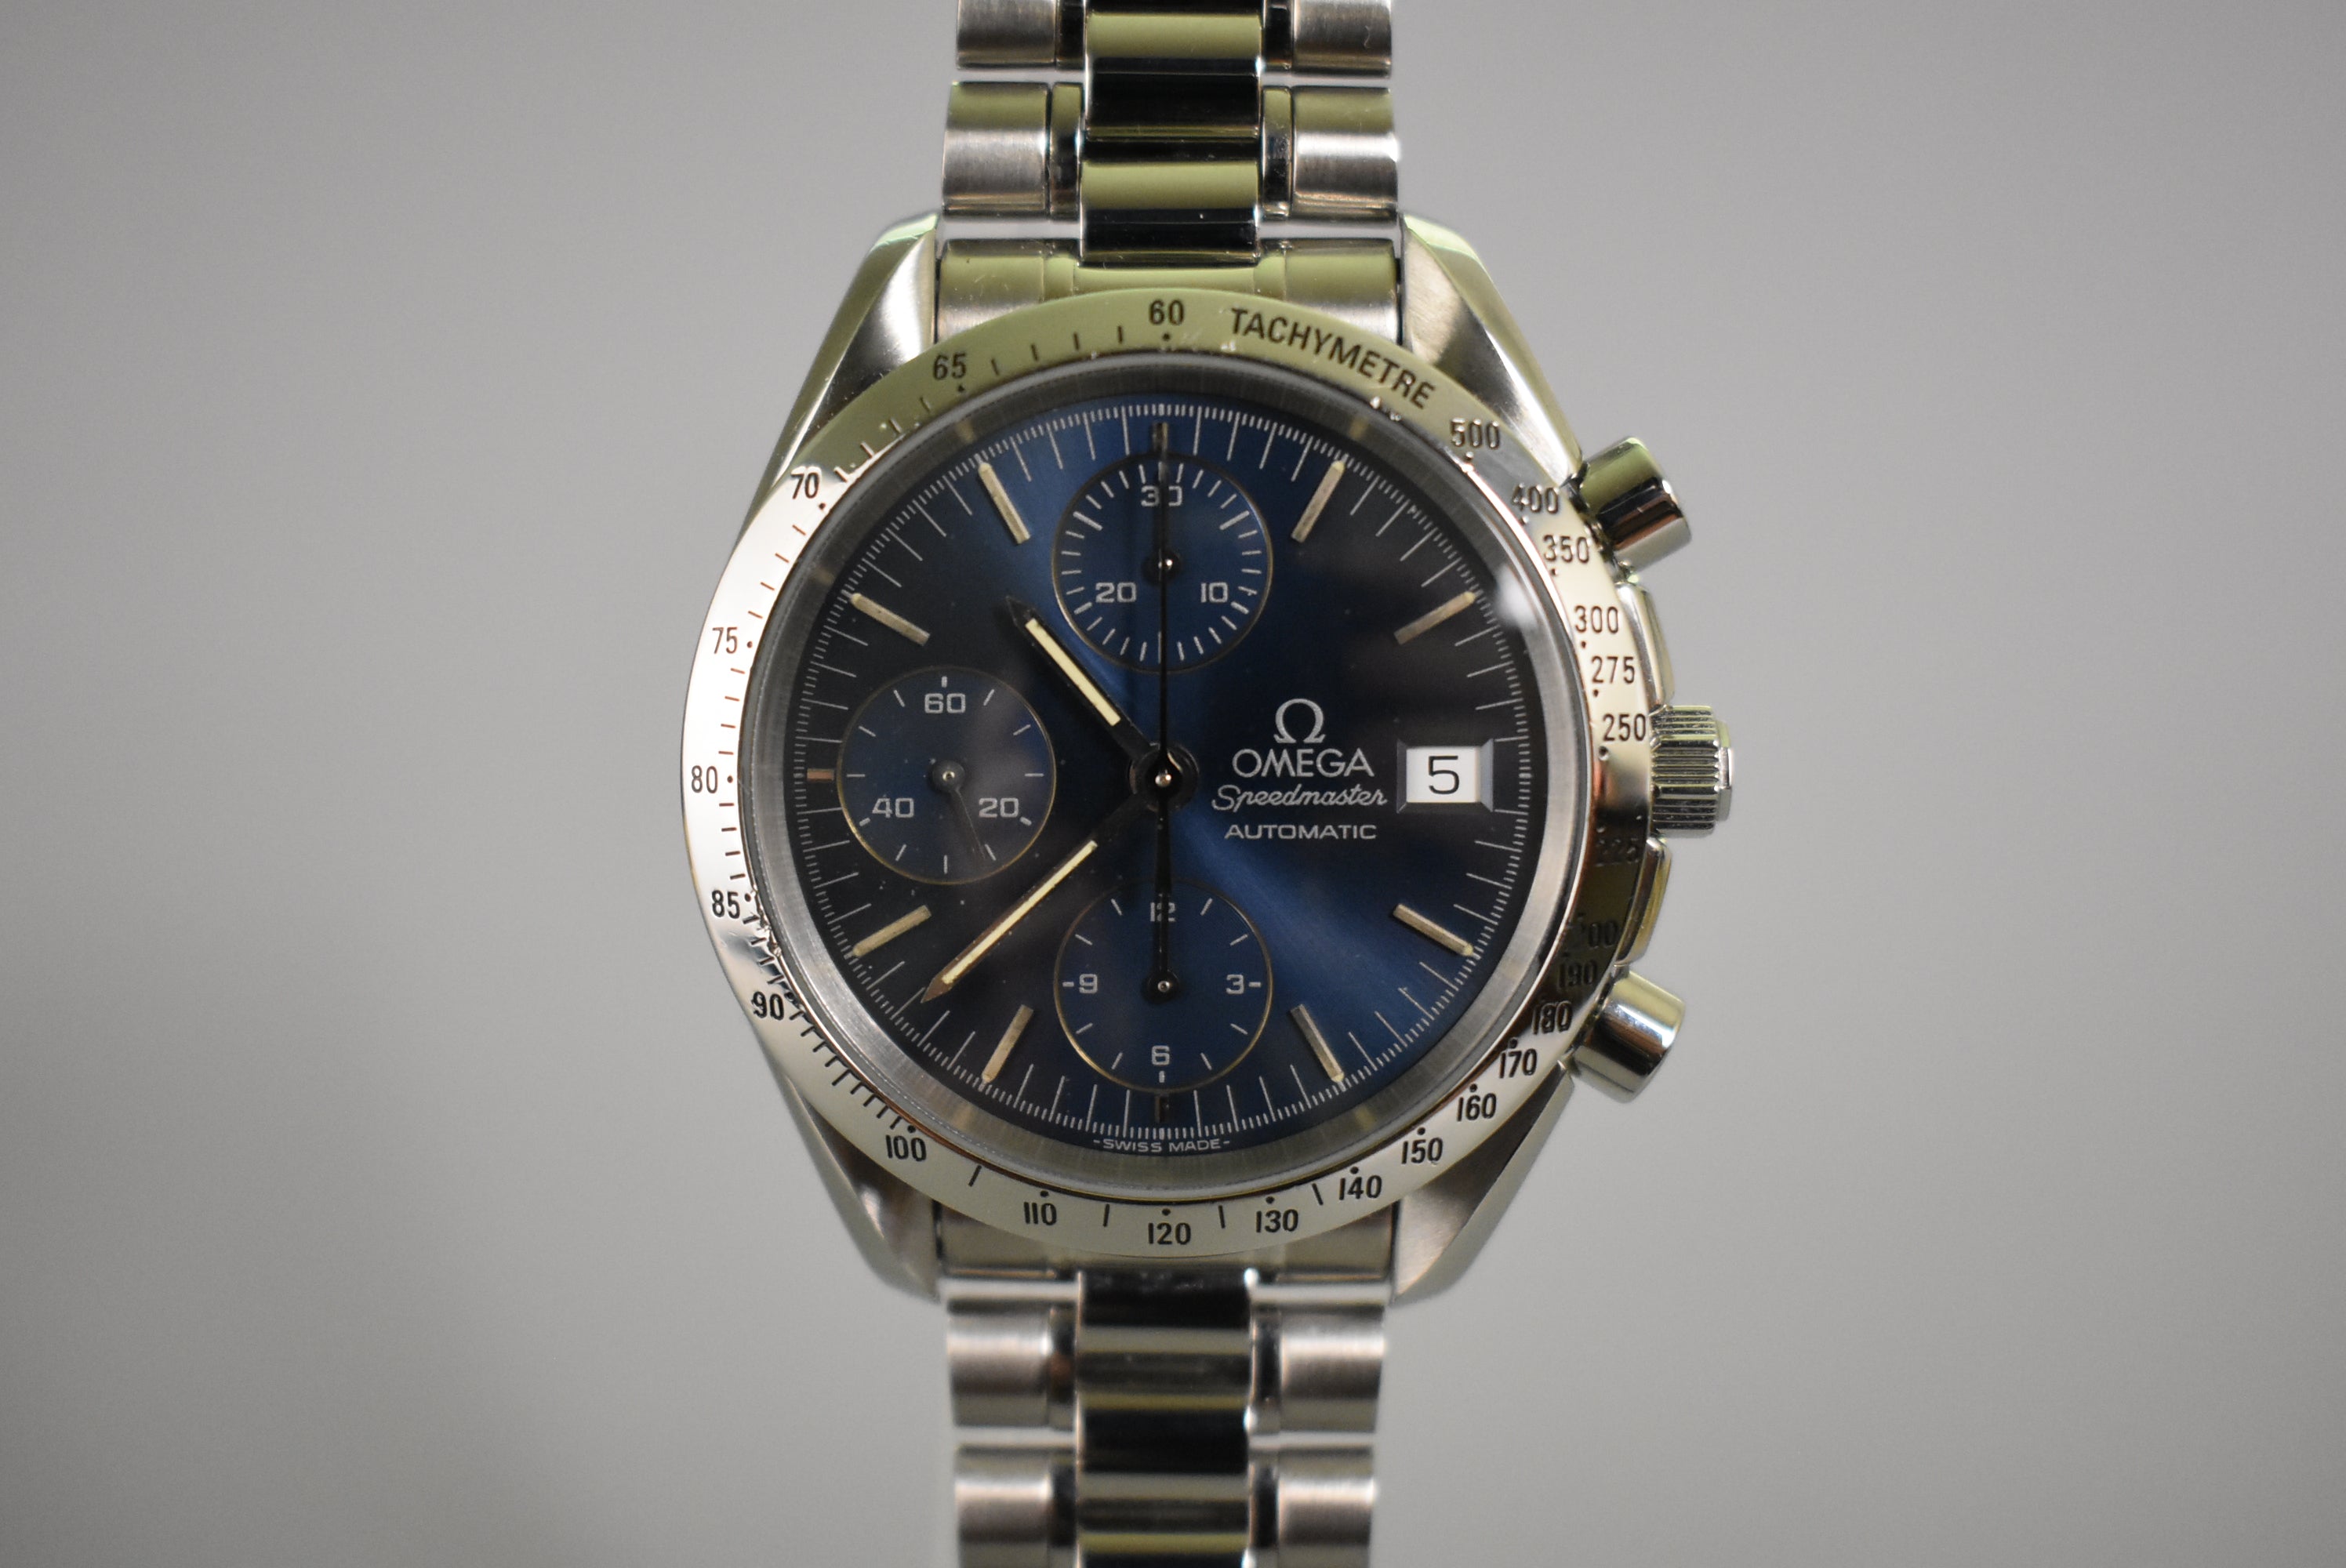 Omega’s 3511 Reference - a Discussion of Value and Collectability